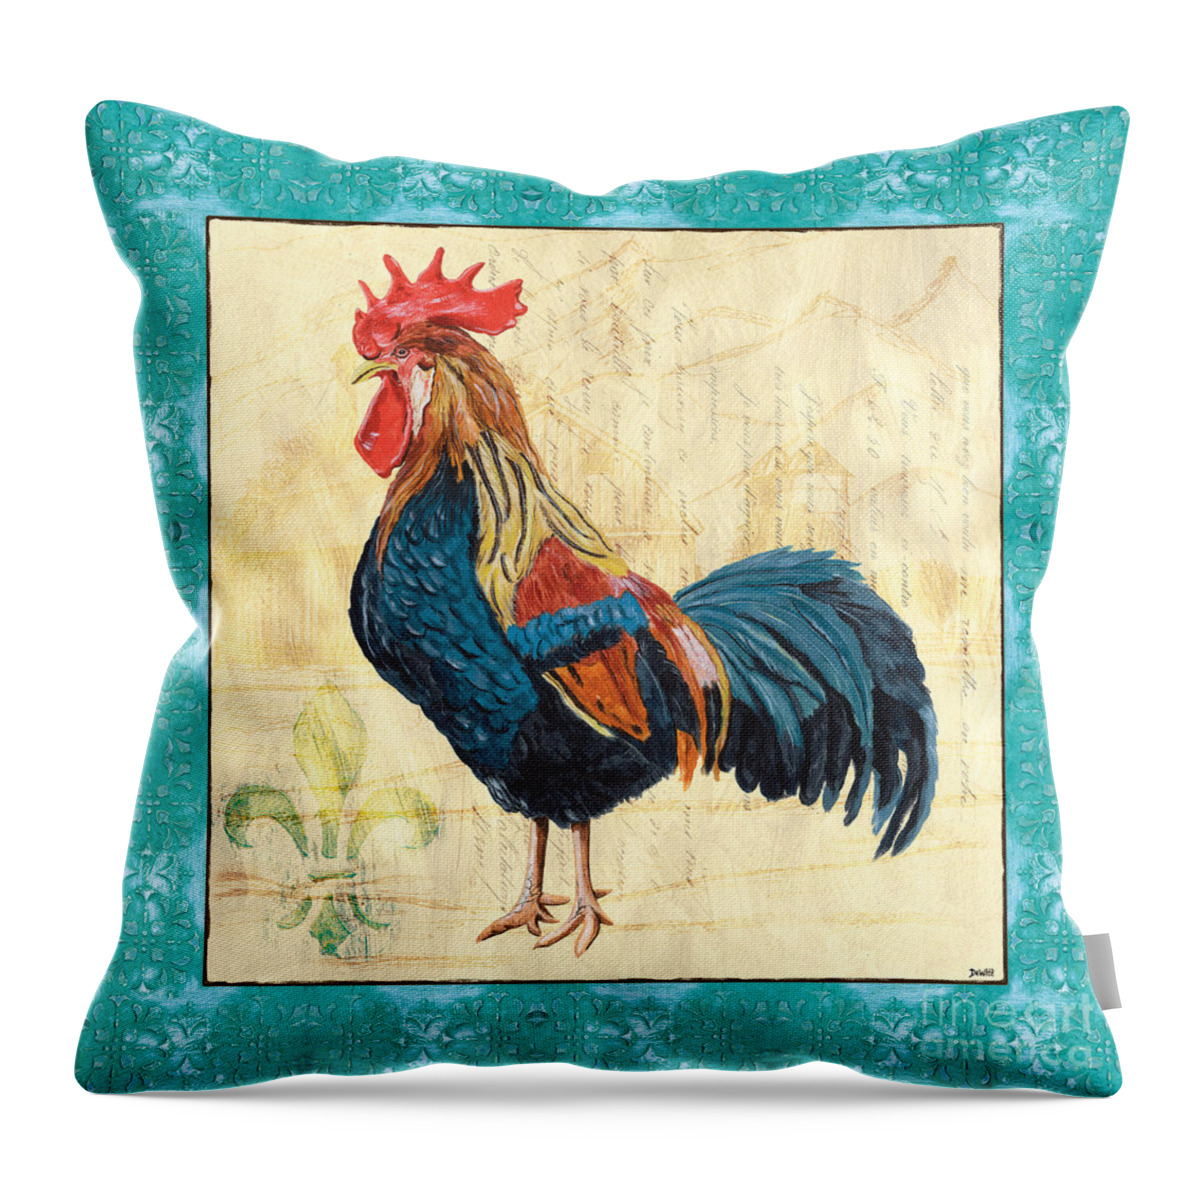 Roosters Throw Pillow featuring the painting Tiffany Rooster 2 by Debbie DeWitt